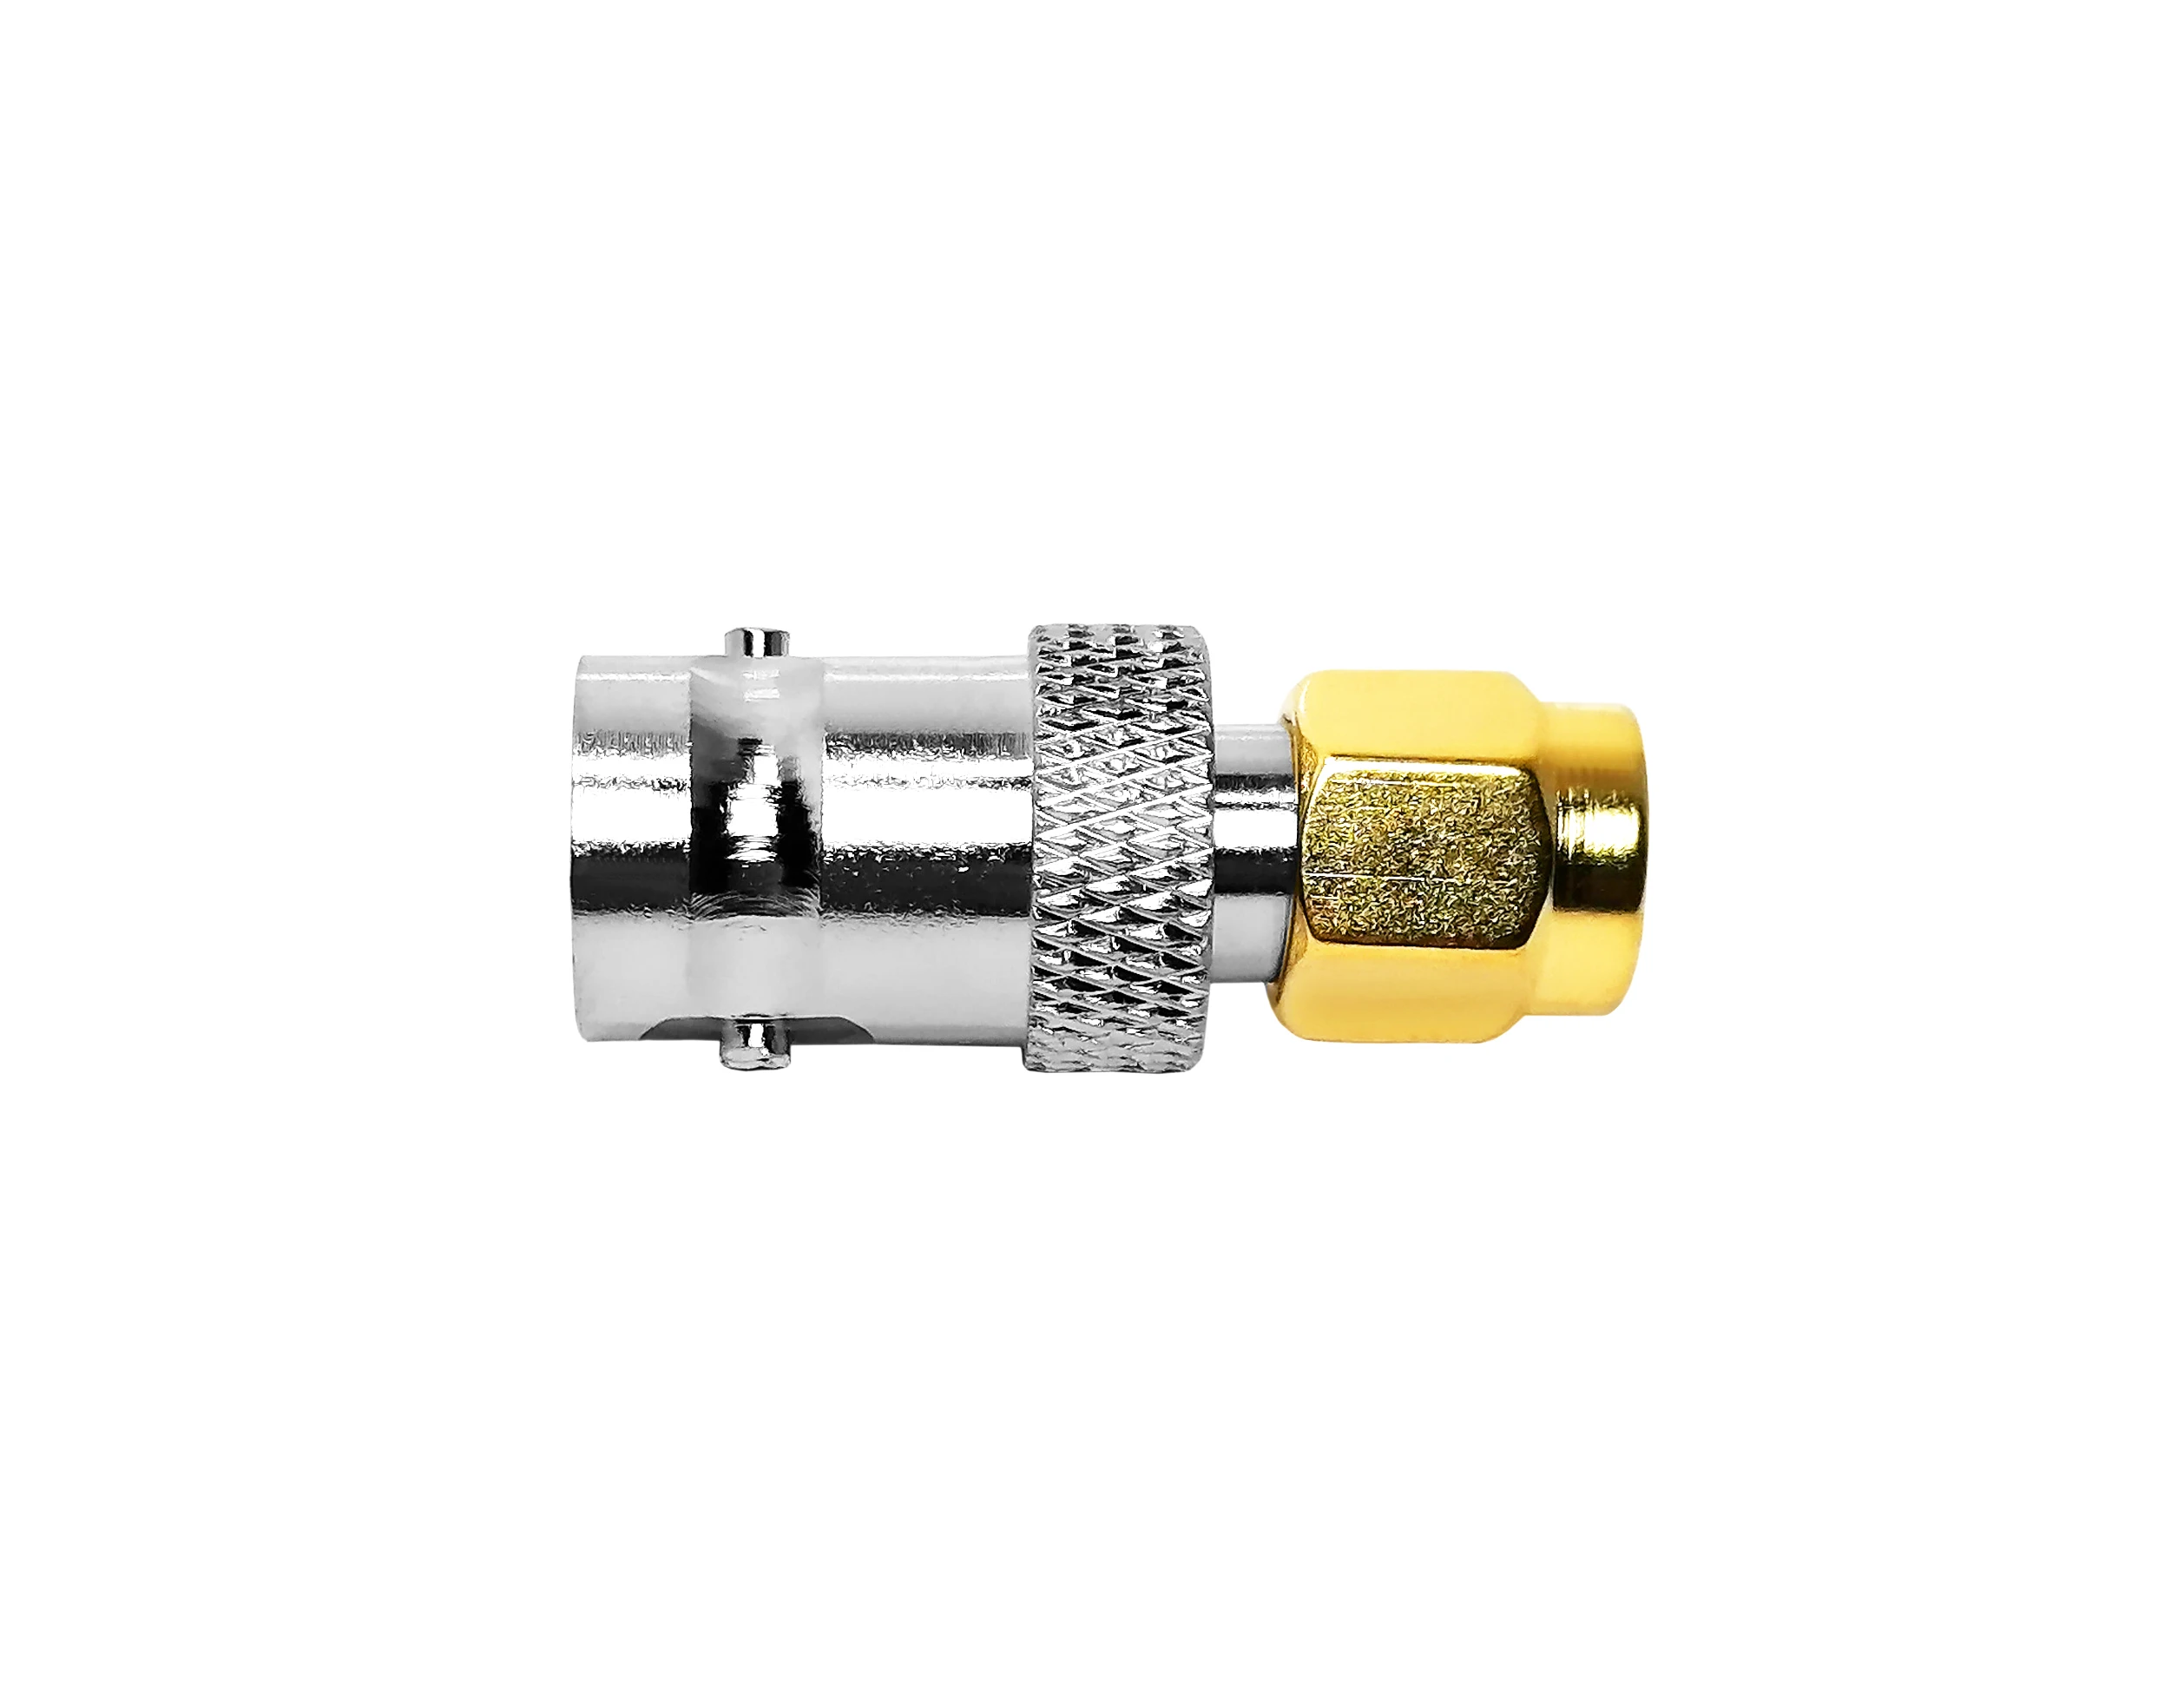 Adaptor Reverse polarity sma female jack to bnc male plug rf coaxial connector adapter details